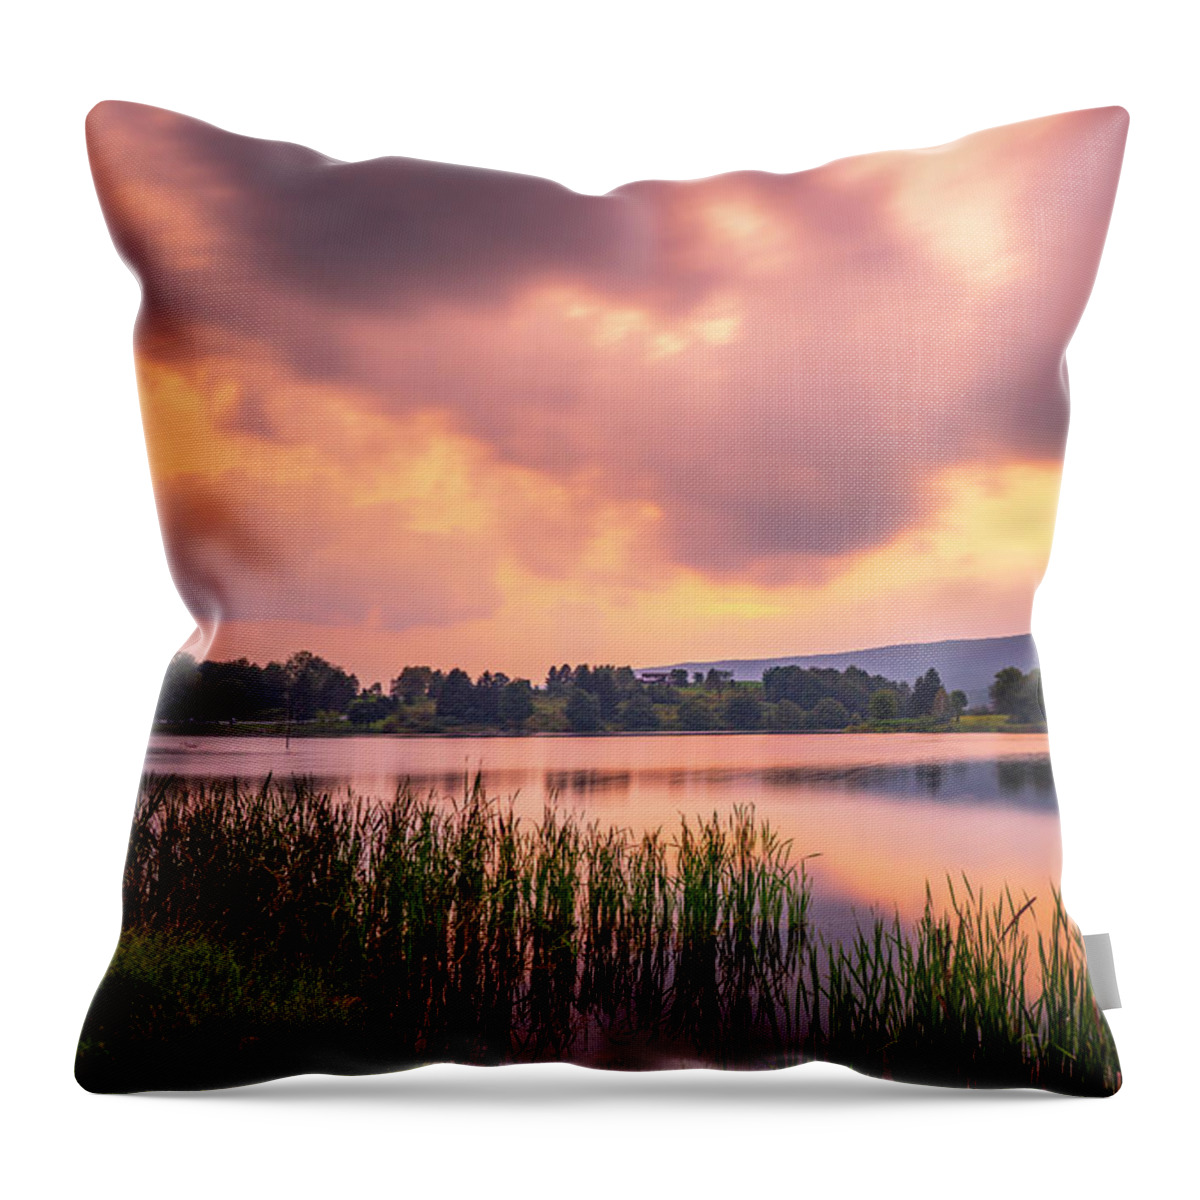 Leaser Throw Pillow featuring the photograph Beautiful September Leaser Lake Sunset by Jason Fink